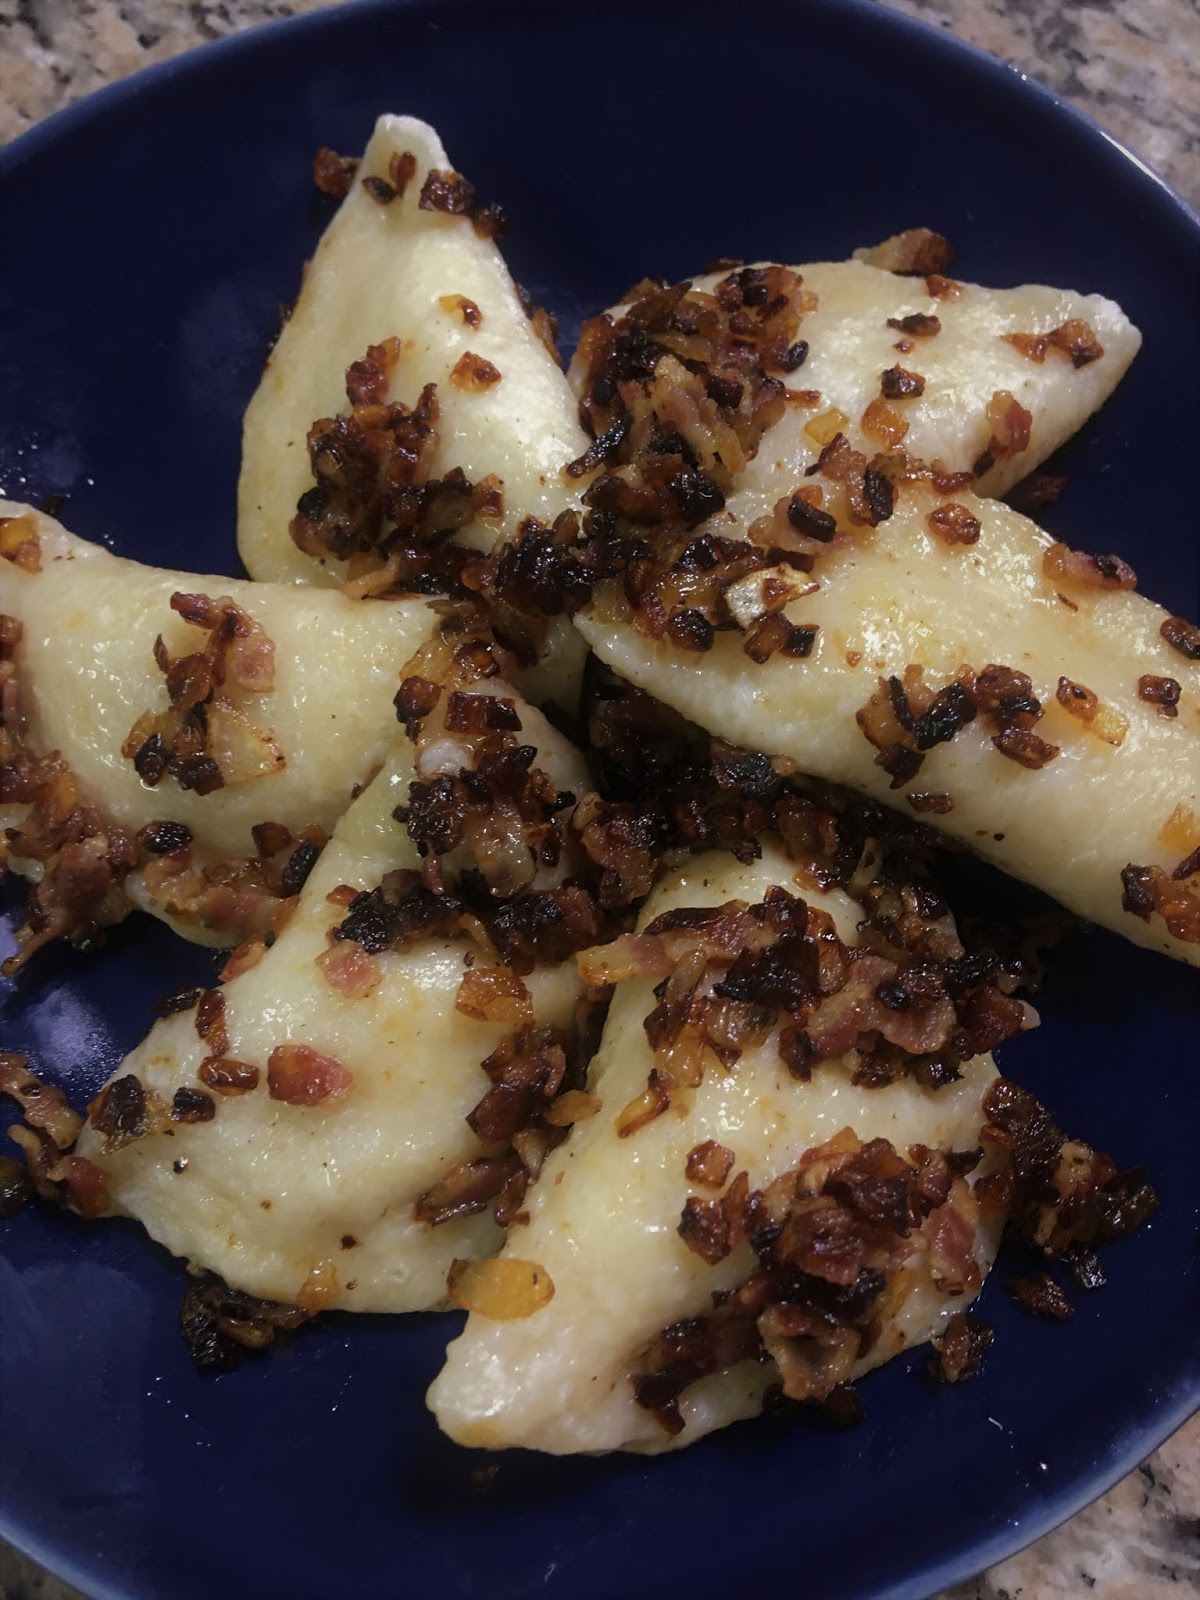 Potato and Sauerkraut Pierogies with Bacon and Caramelized Onions